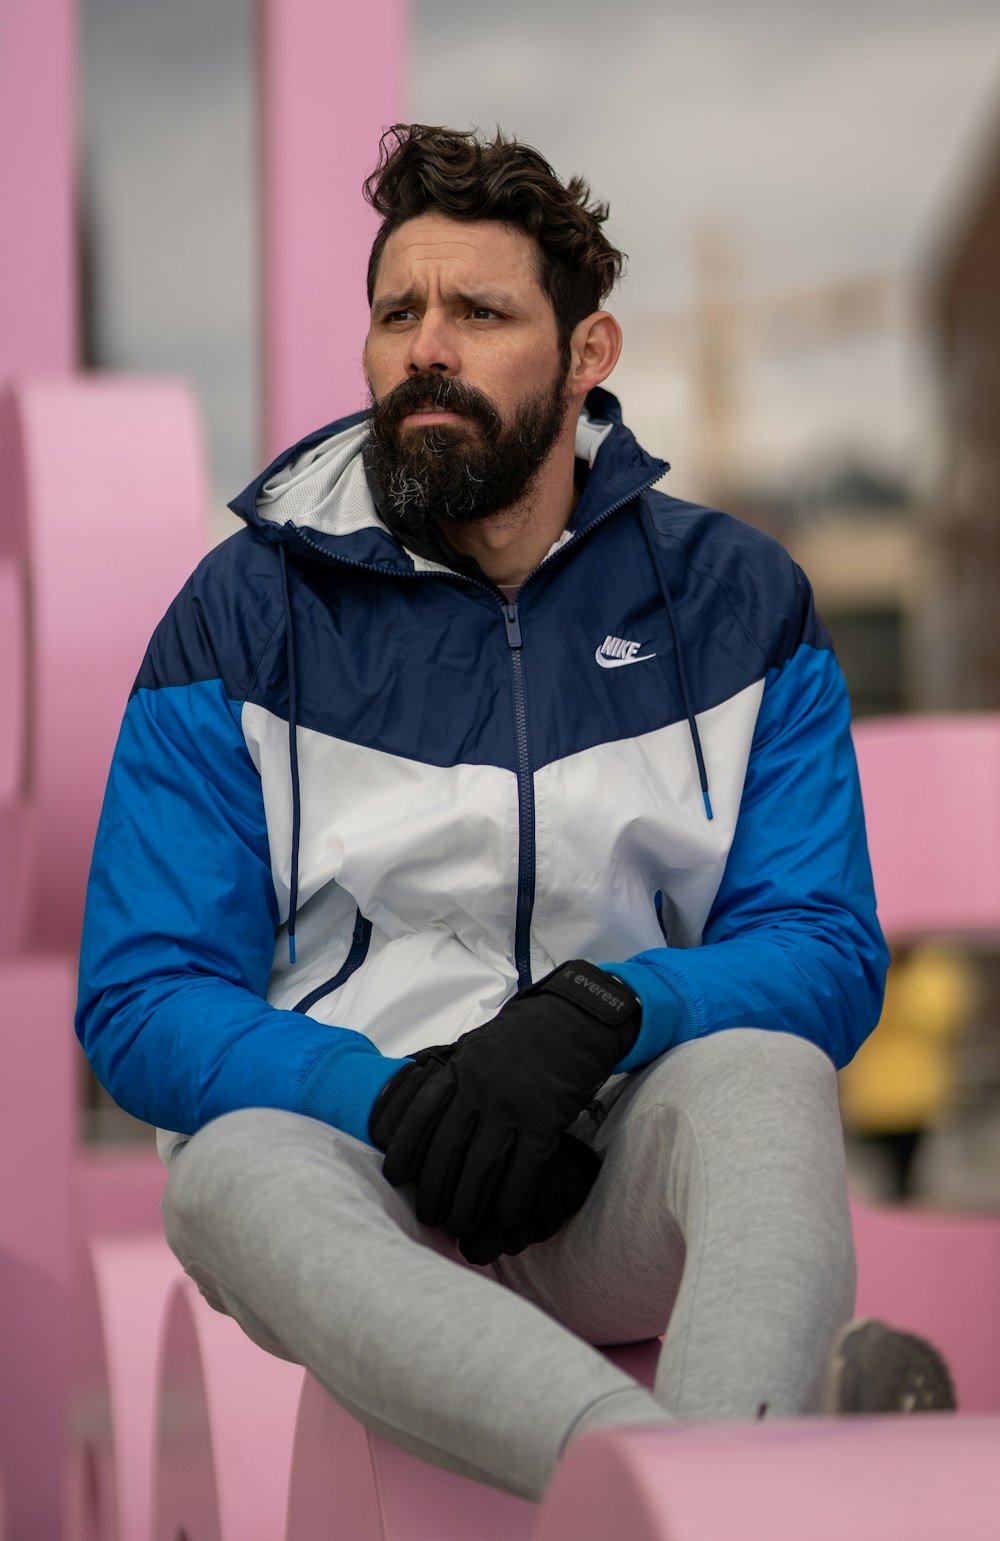 man in blue and white zip up jacket and gray pants sitting on brown wooden bench